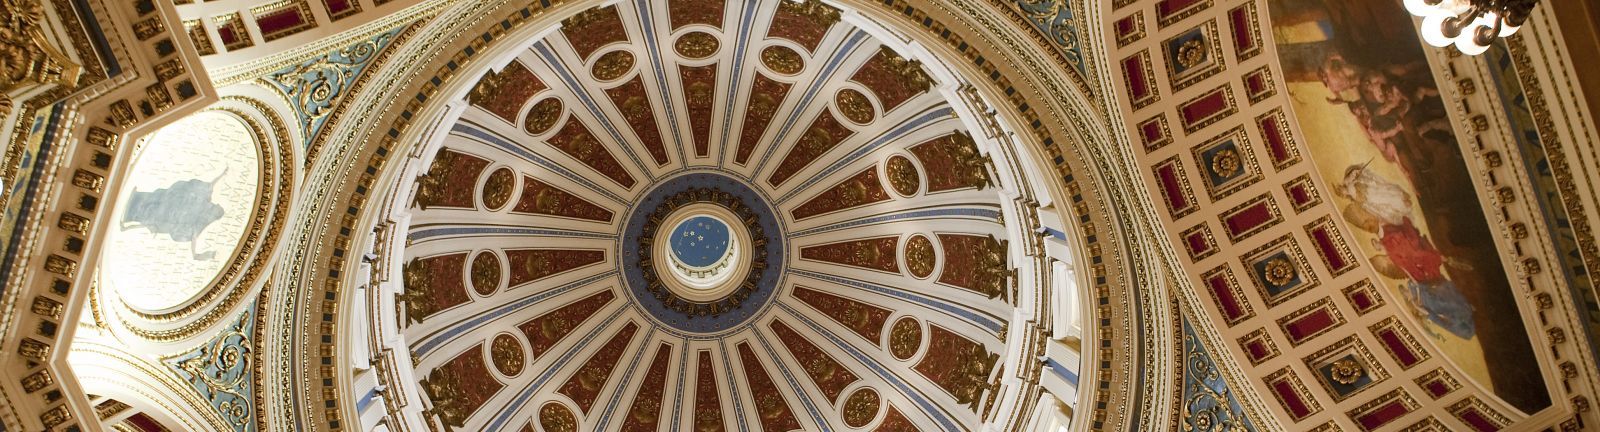 An interior view of the Pennsylvania capitol building dome in Harrisburg